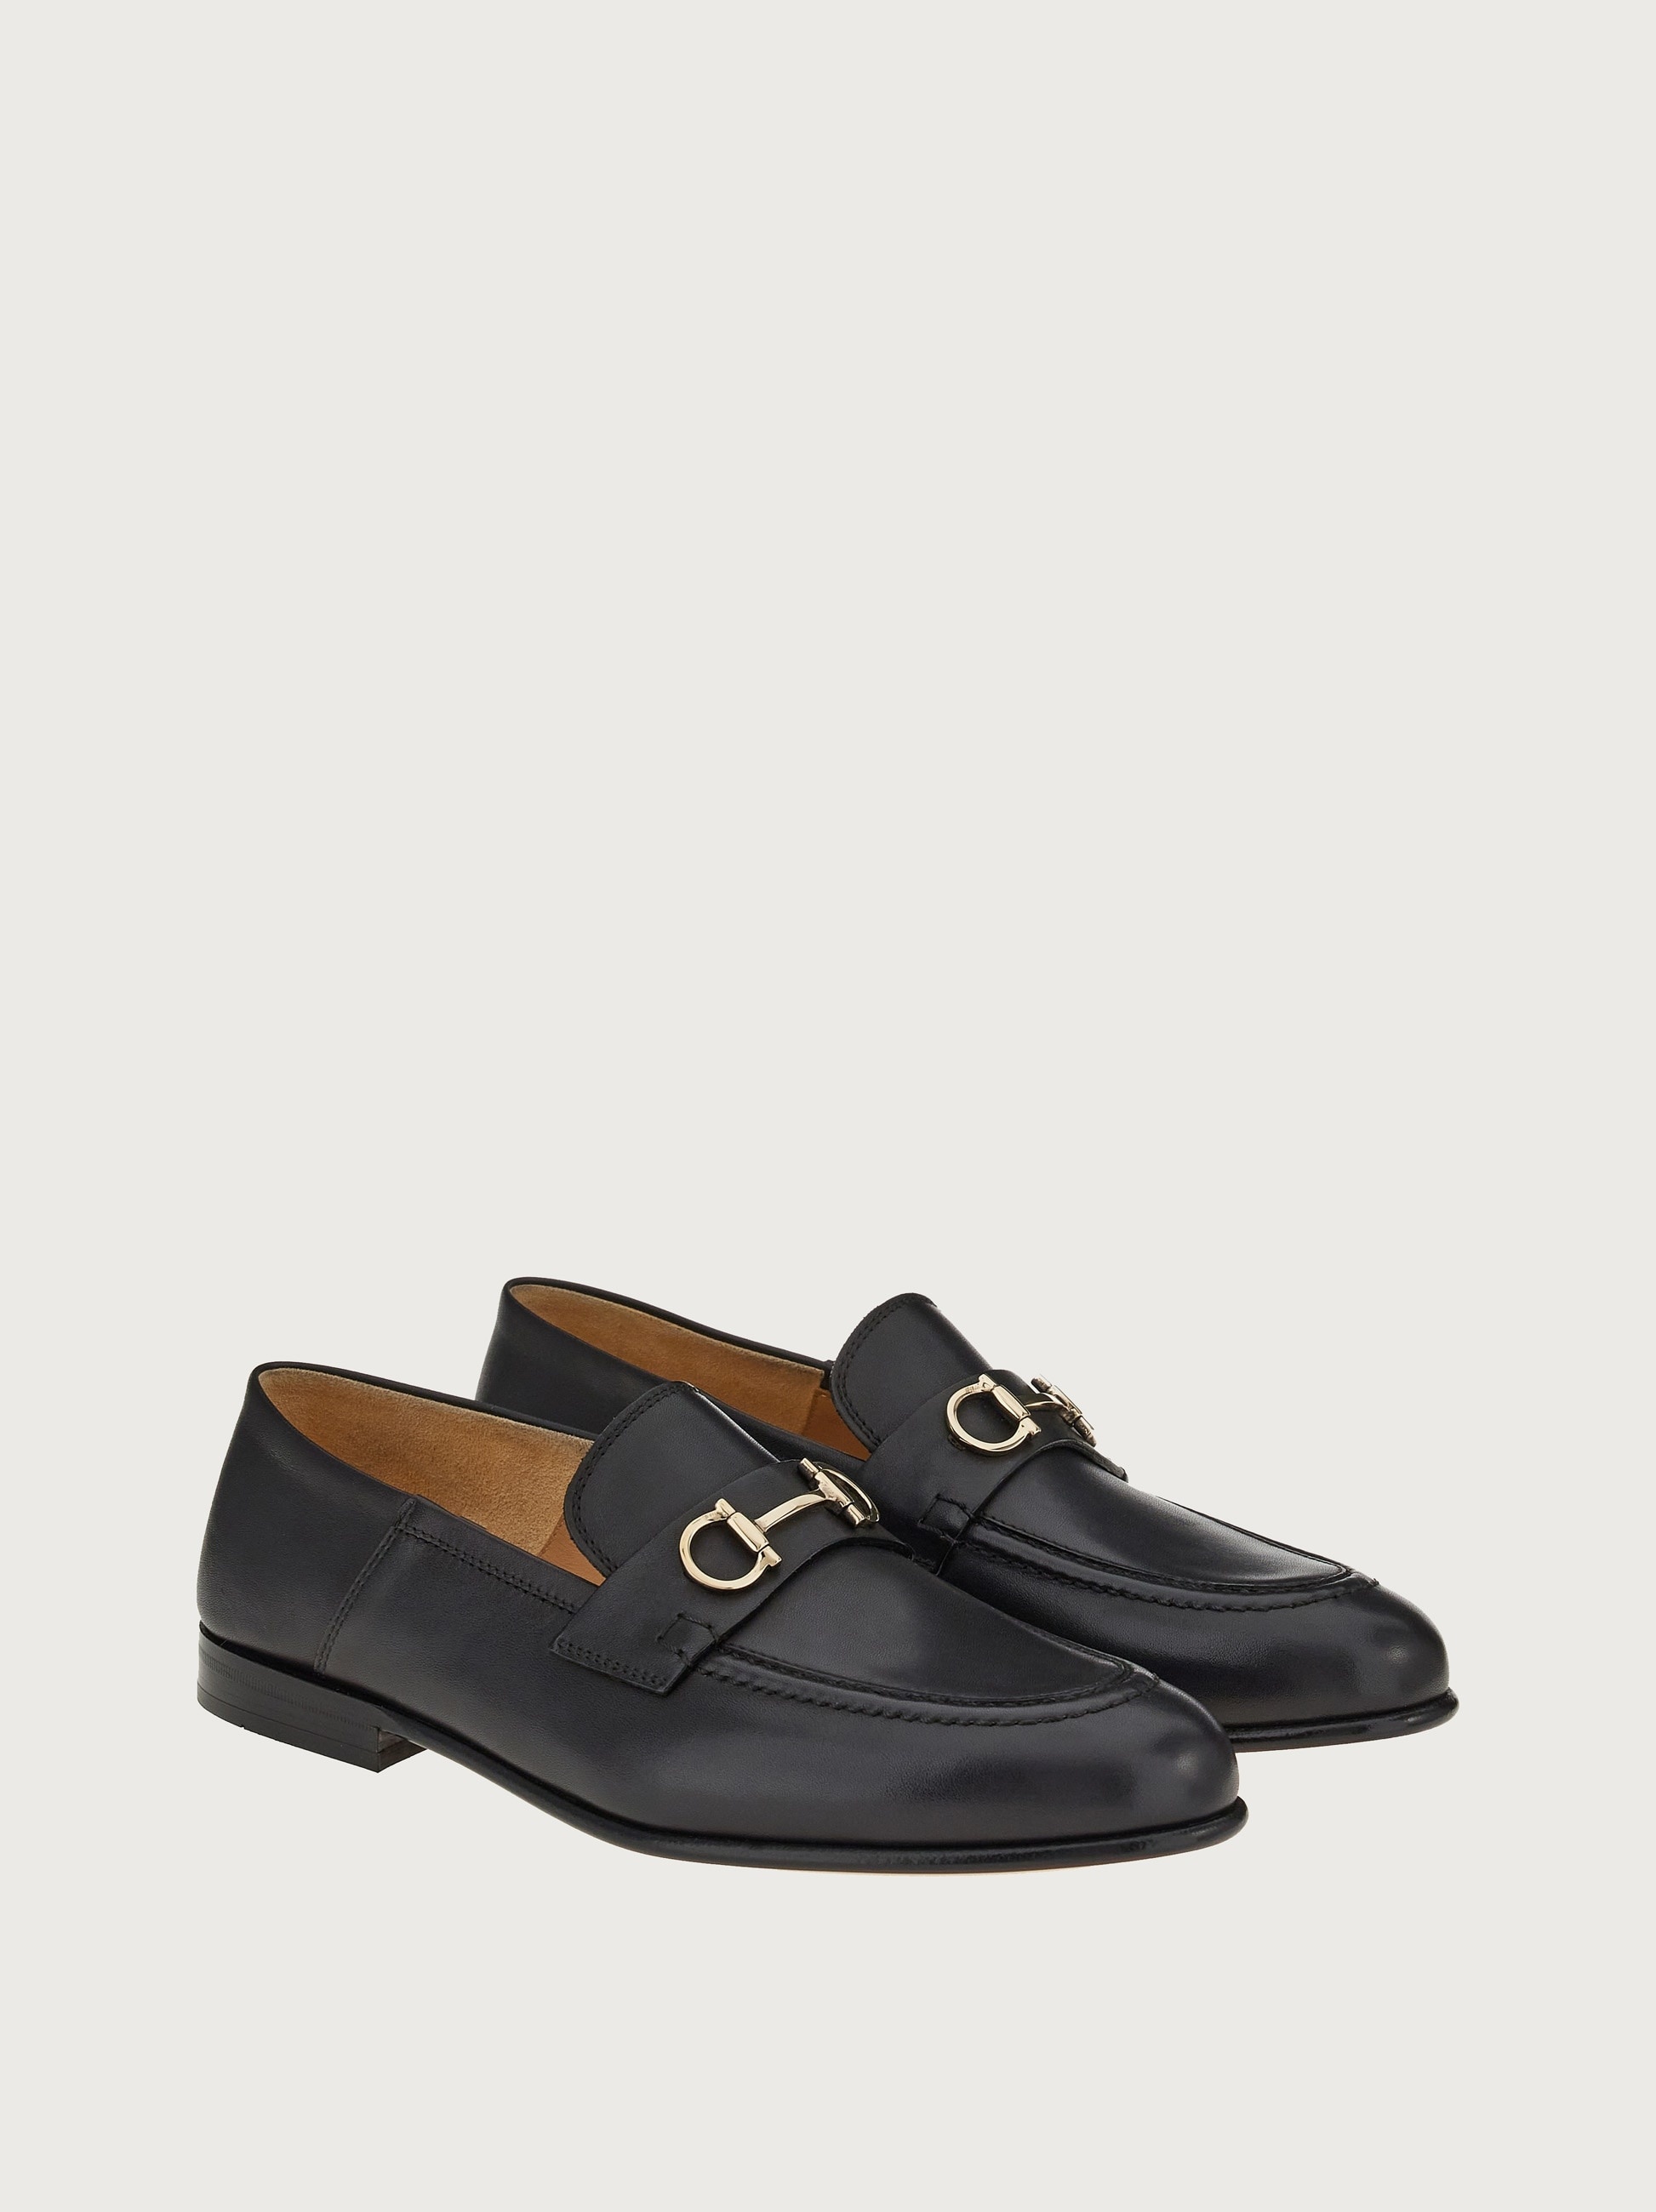 Mule loafer with Gancini ornament - 4